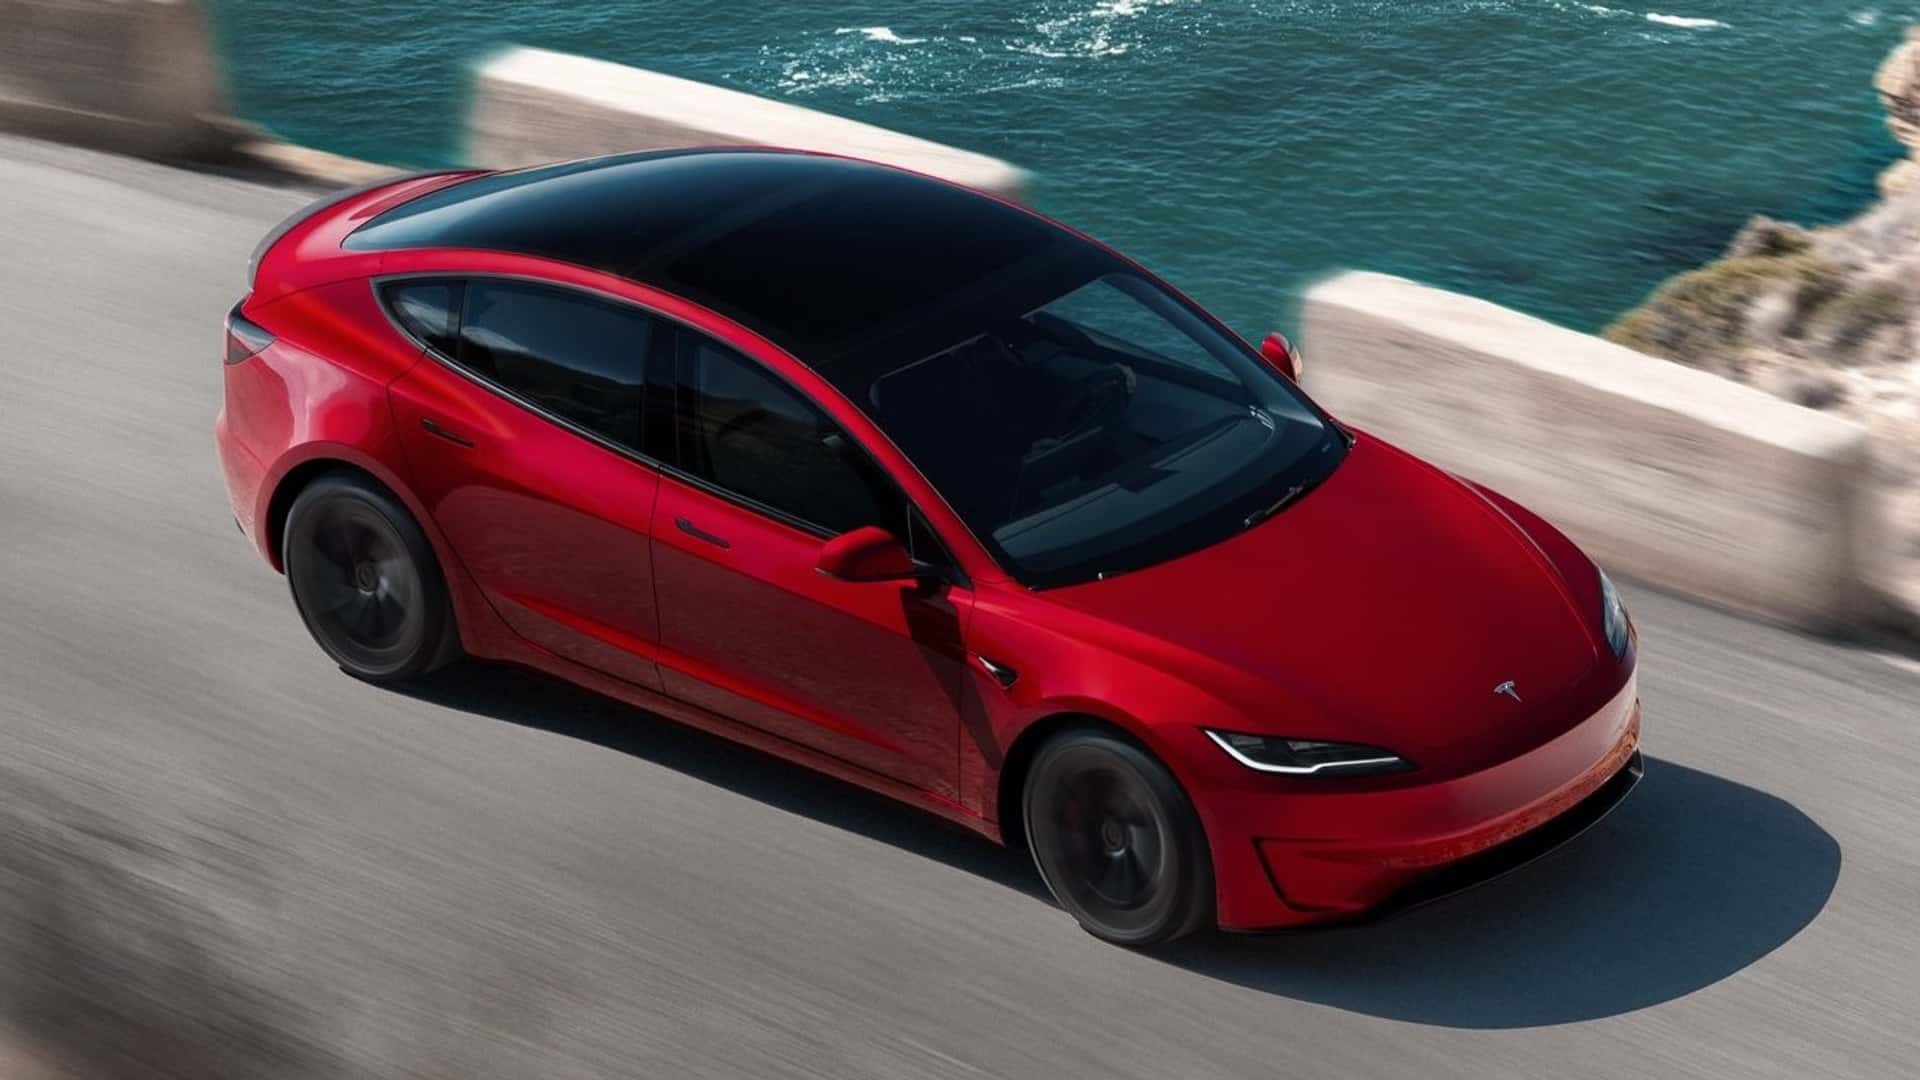 the new tesla model 3 performance hits 60 mph in 2.9 seconds